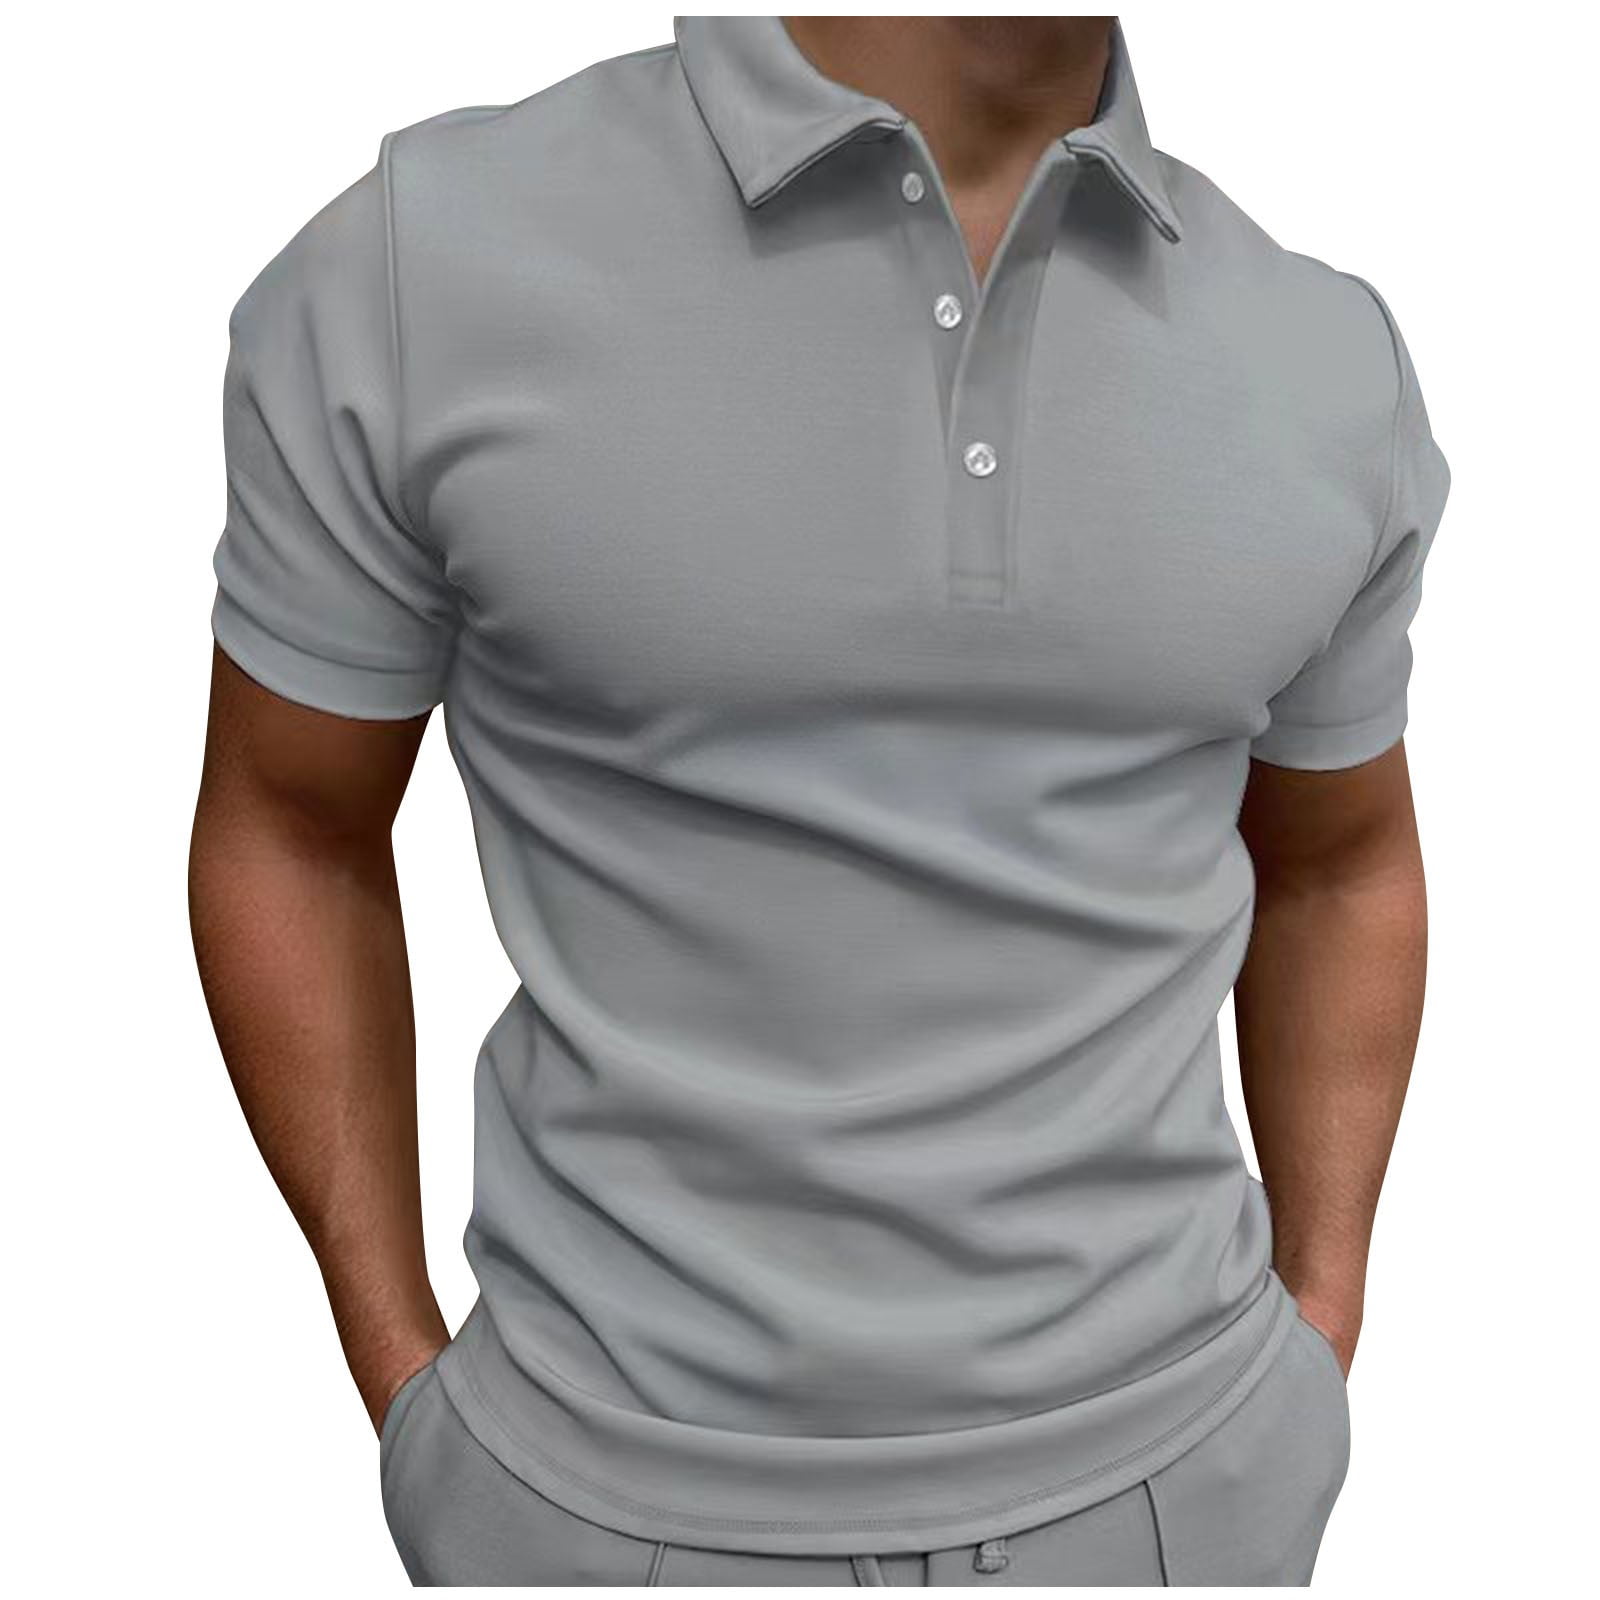 adviicd Men's Short Sleeve Cotton Polo Shirt in Regular Fit Polo Shirts ...